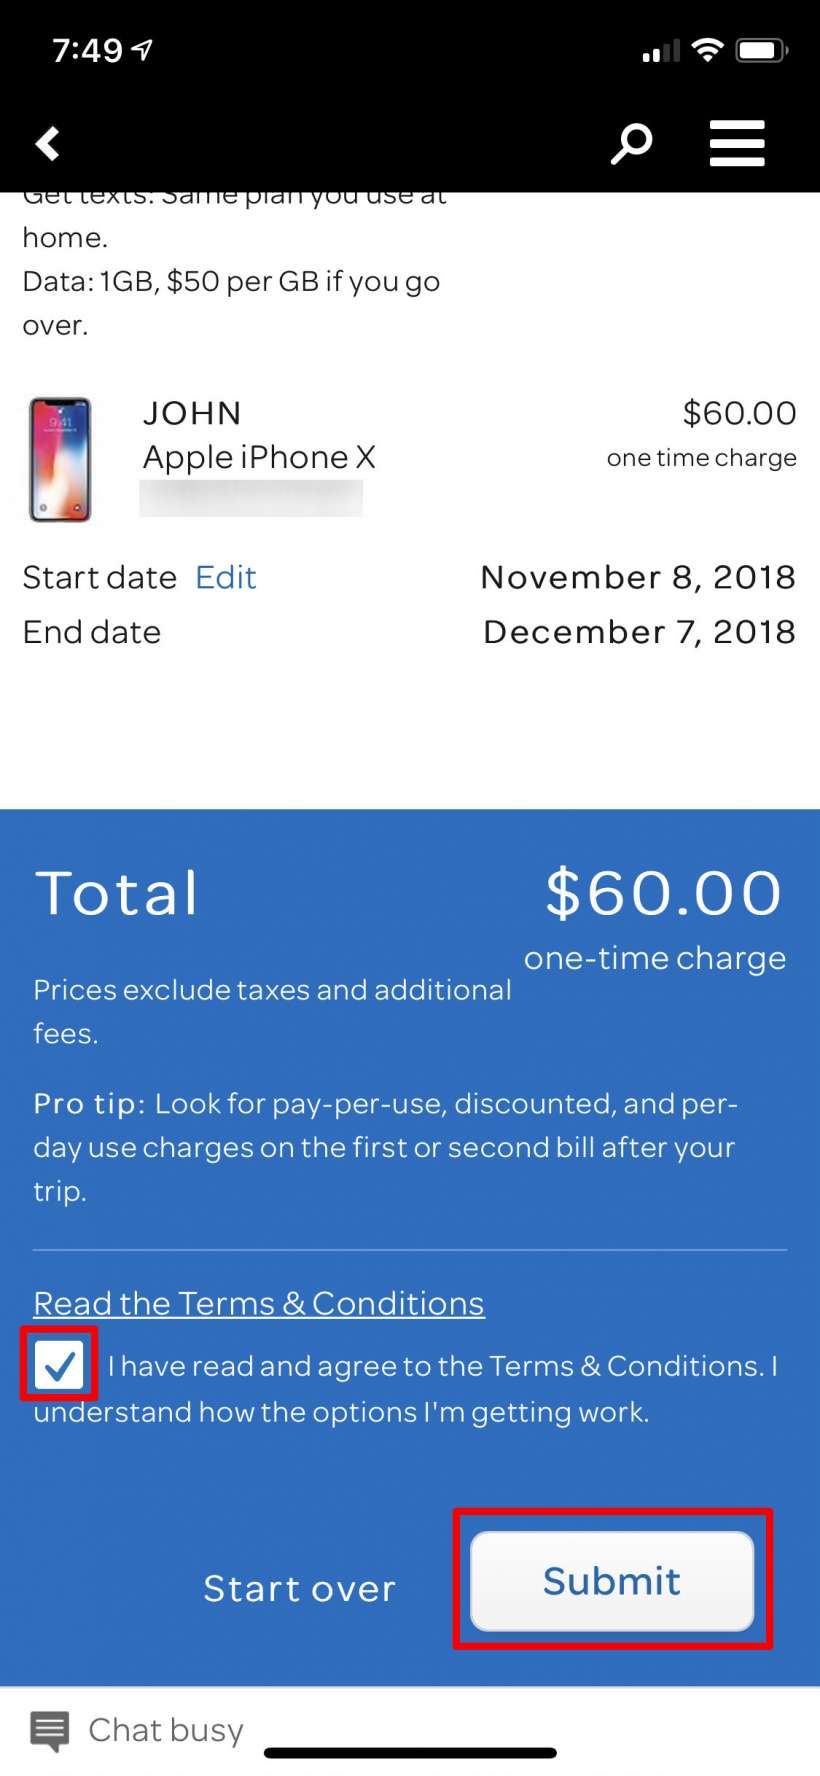 How to sign up for AT&T Passport for international travel on iPhone.